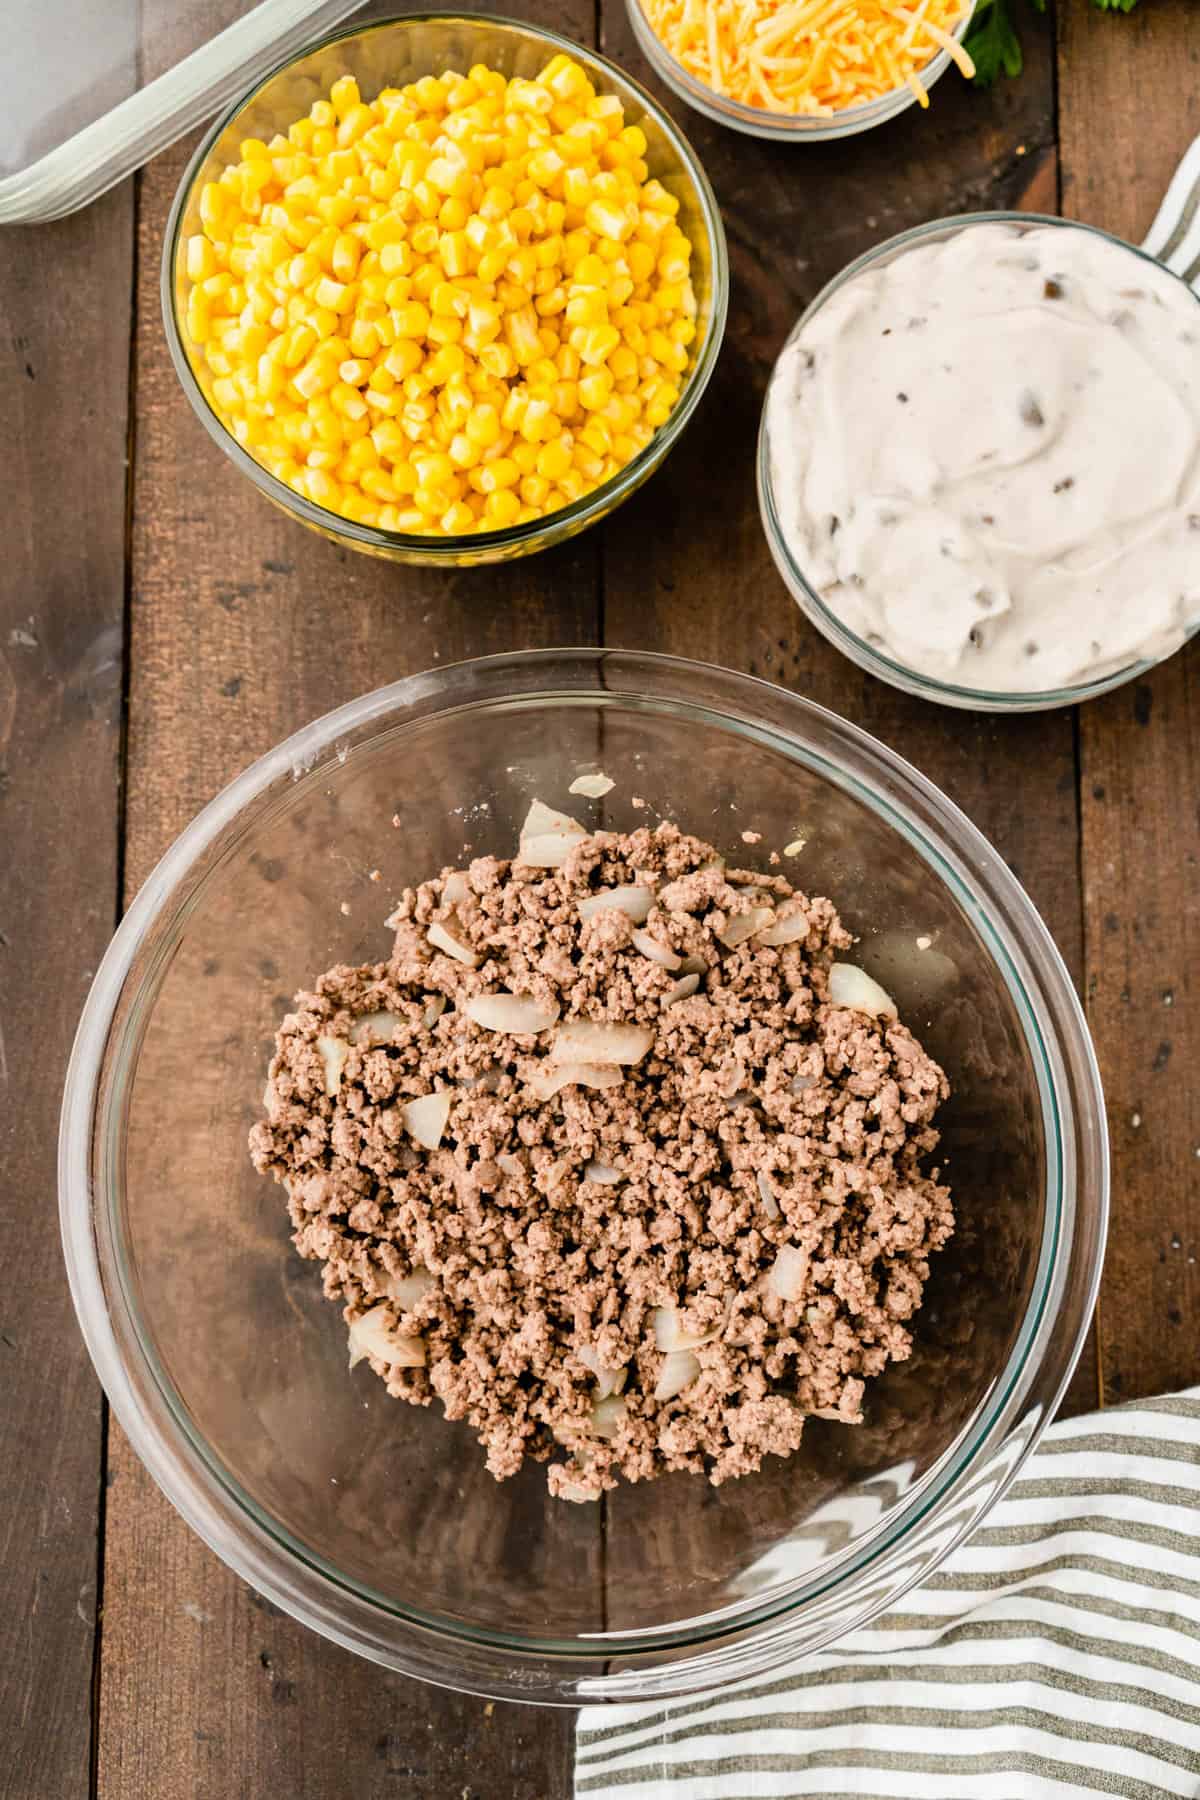 Combining browned ground beef and seasonings in mixing bowl for Tator Tot Casserole recipe